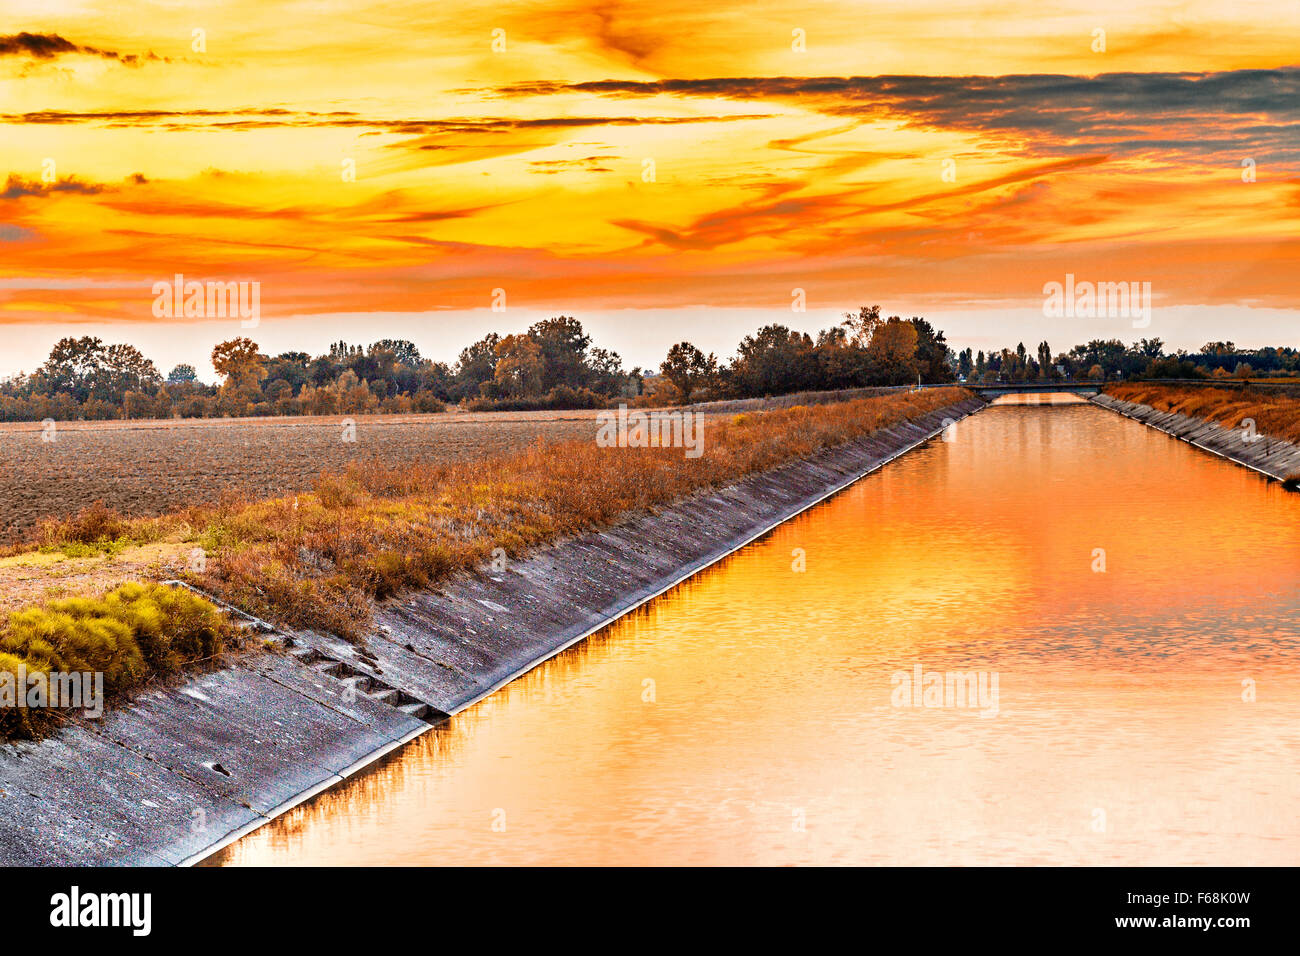 Channel to divert river water for irrigation of cultivated fields Stock Photo